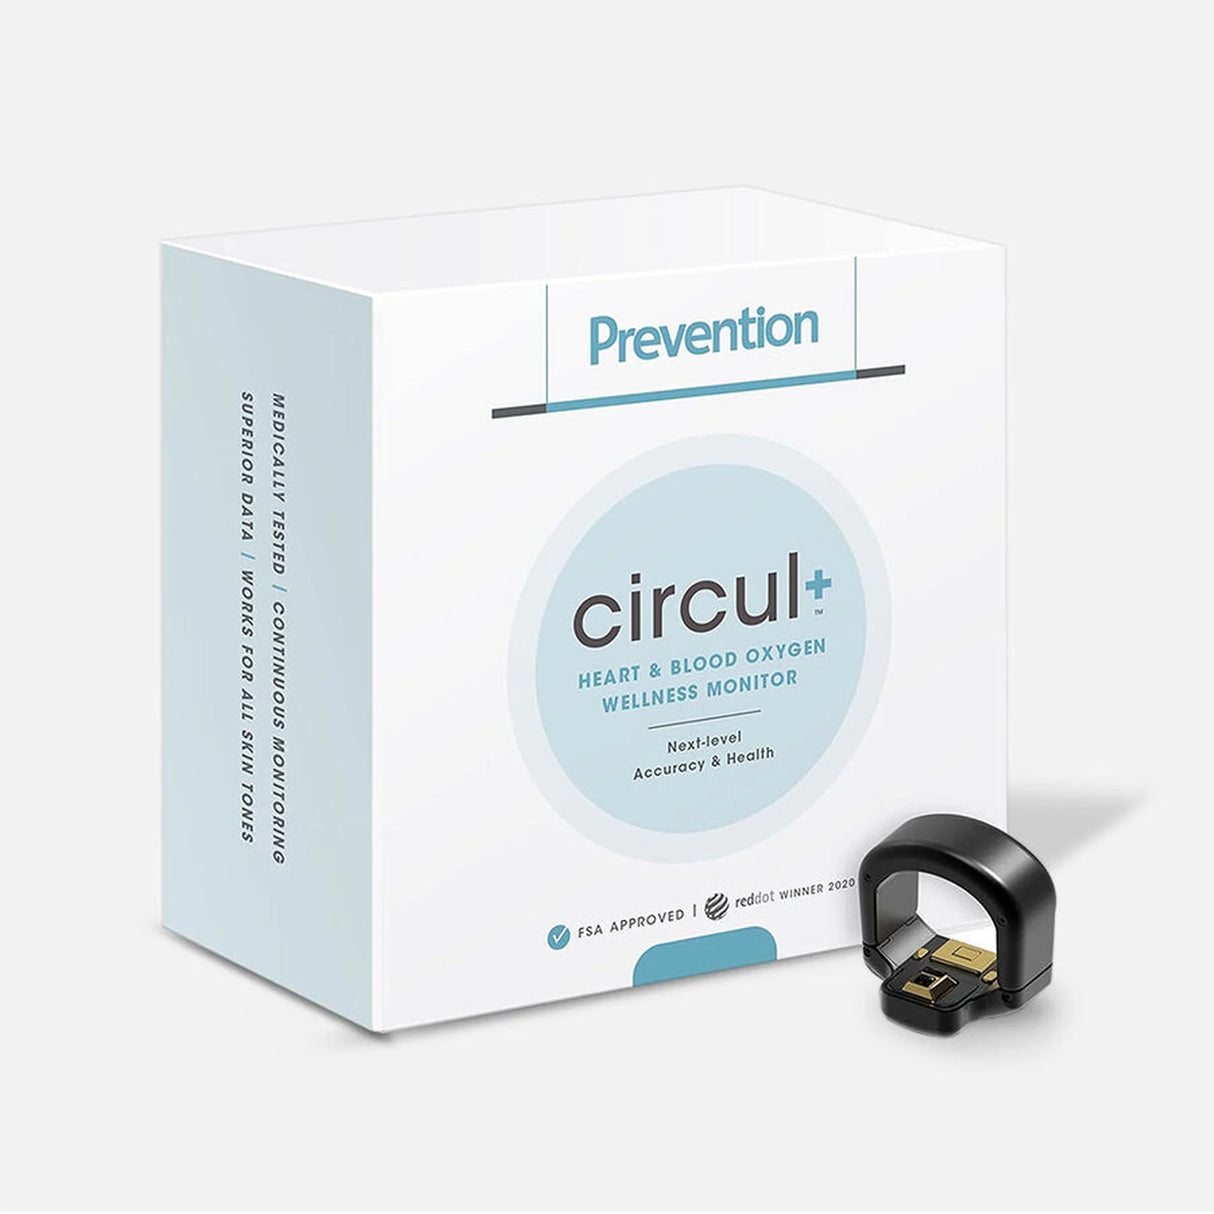 Prevention Circul+ Heart & Blood Oxygen Monitor